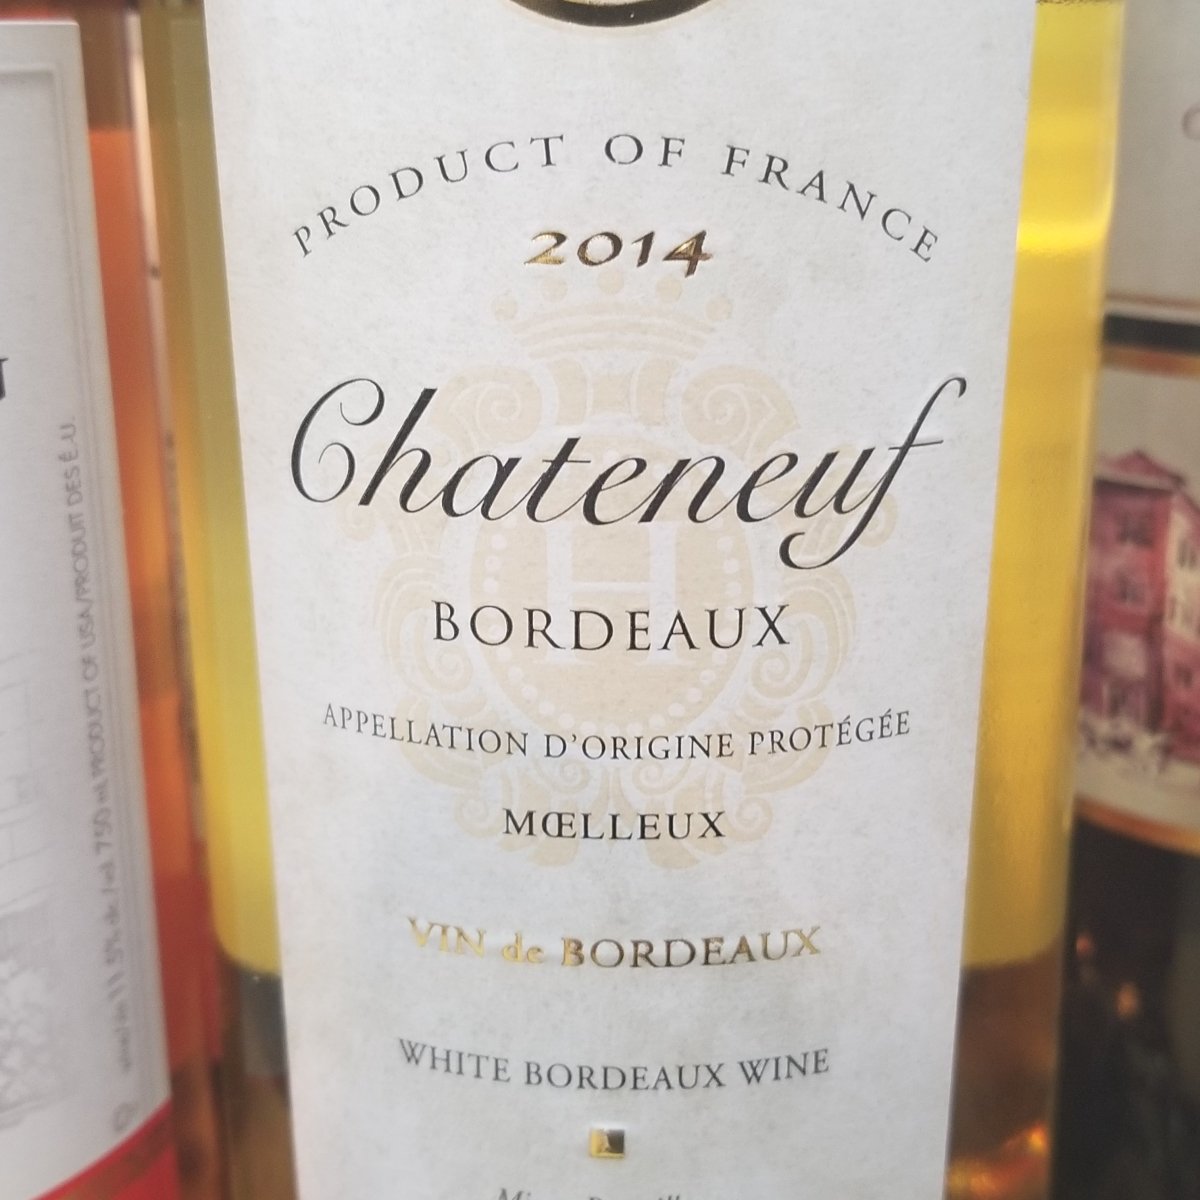 Chateneuf-Bordeaux White 750ml (Kosher for Passover) - Sip & Say